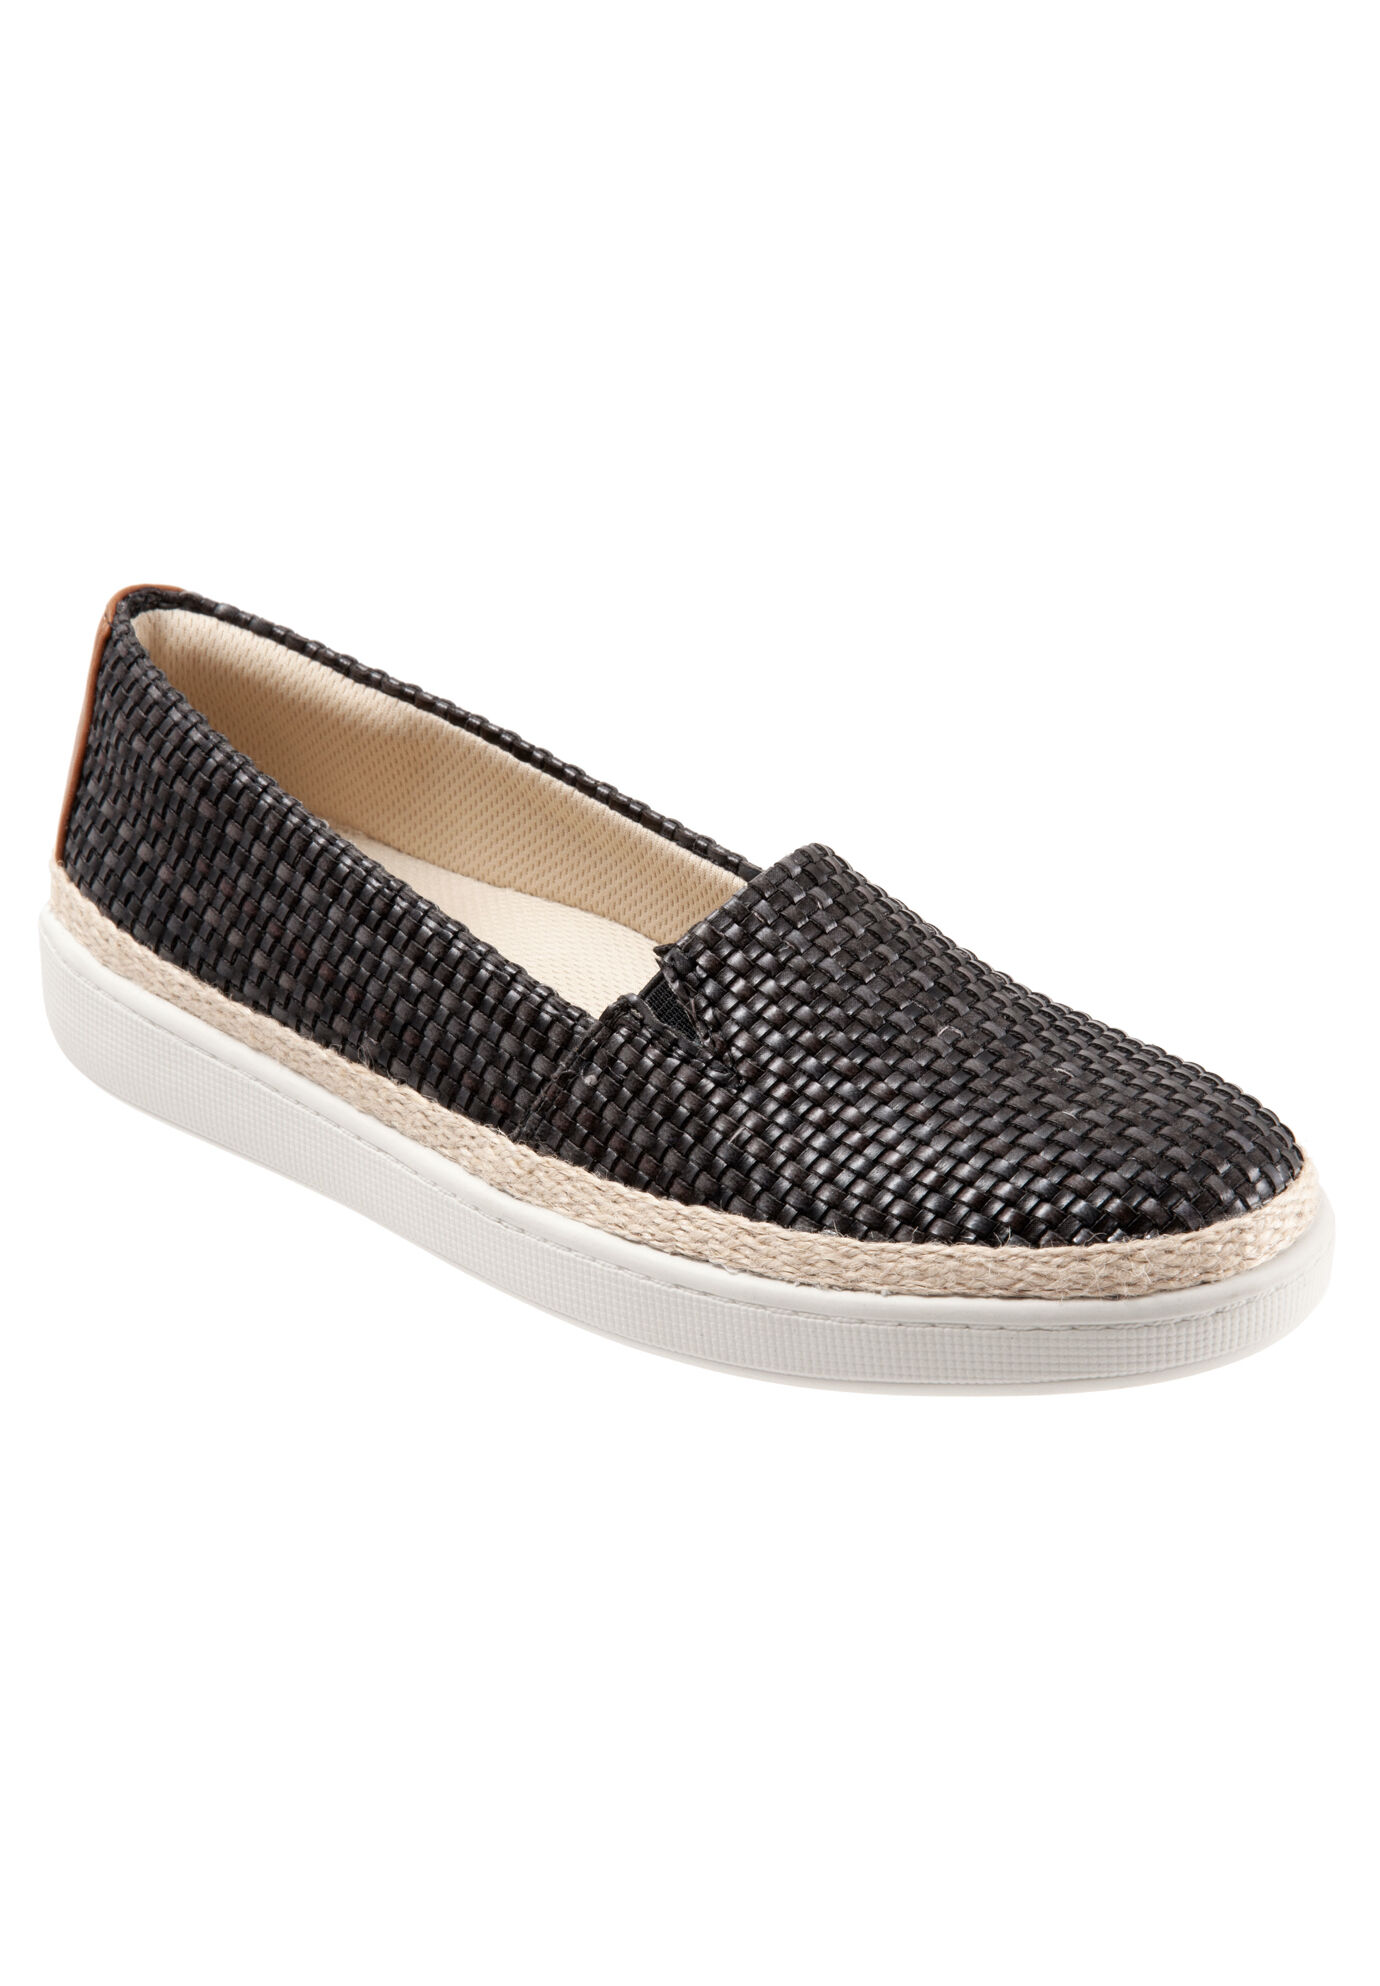 Extra Wide Width Women's Accent Slip Ons by Trotters in Black Braid (Size 6 WW)